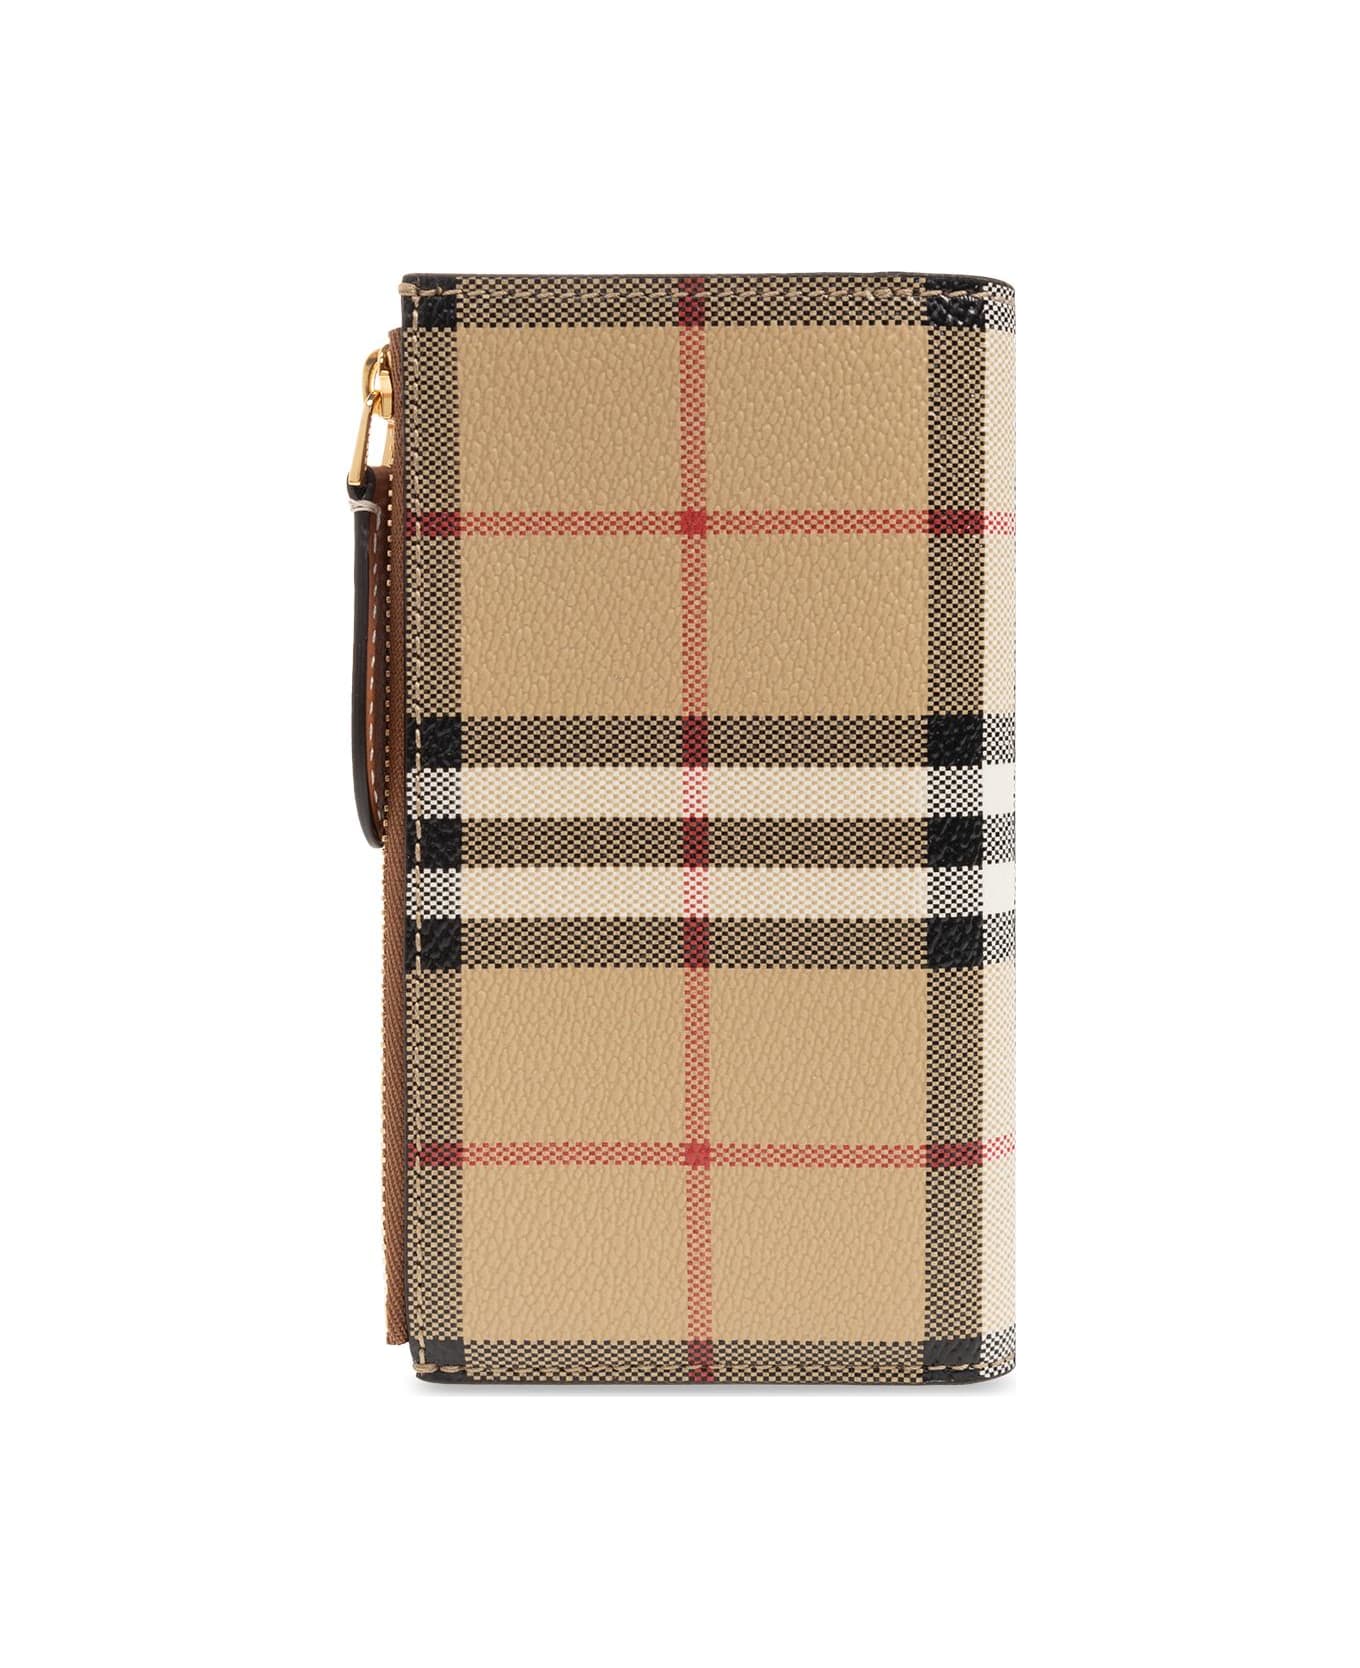 Burberry Checked Wallet - Archive Beige 財布